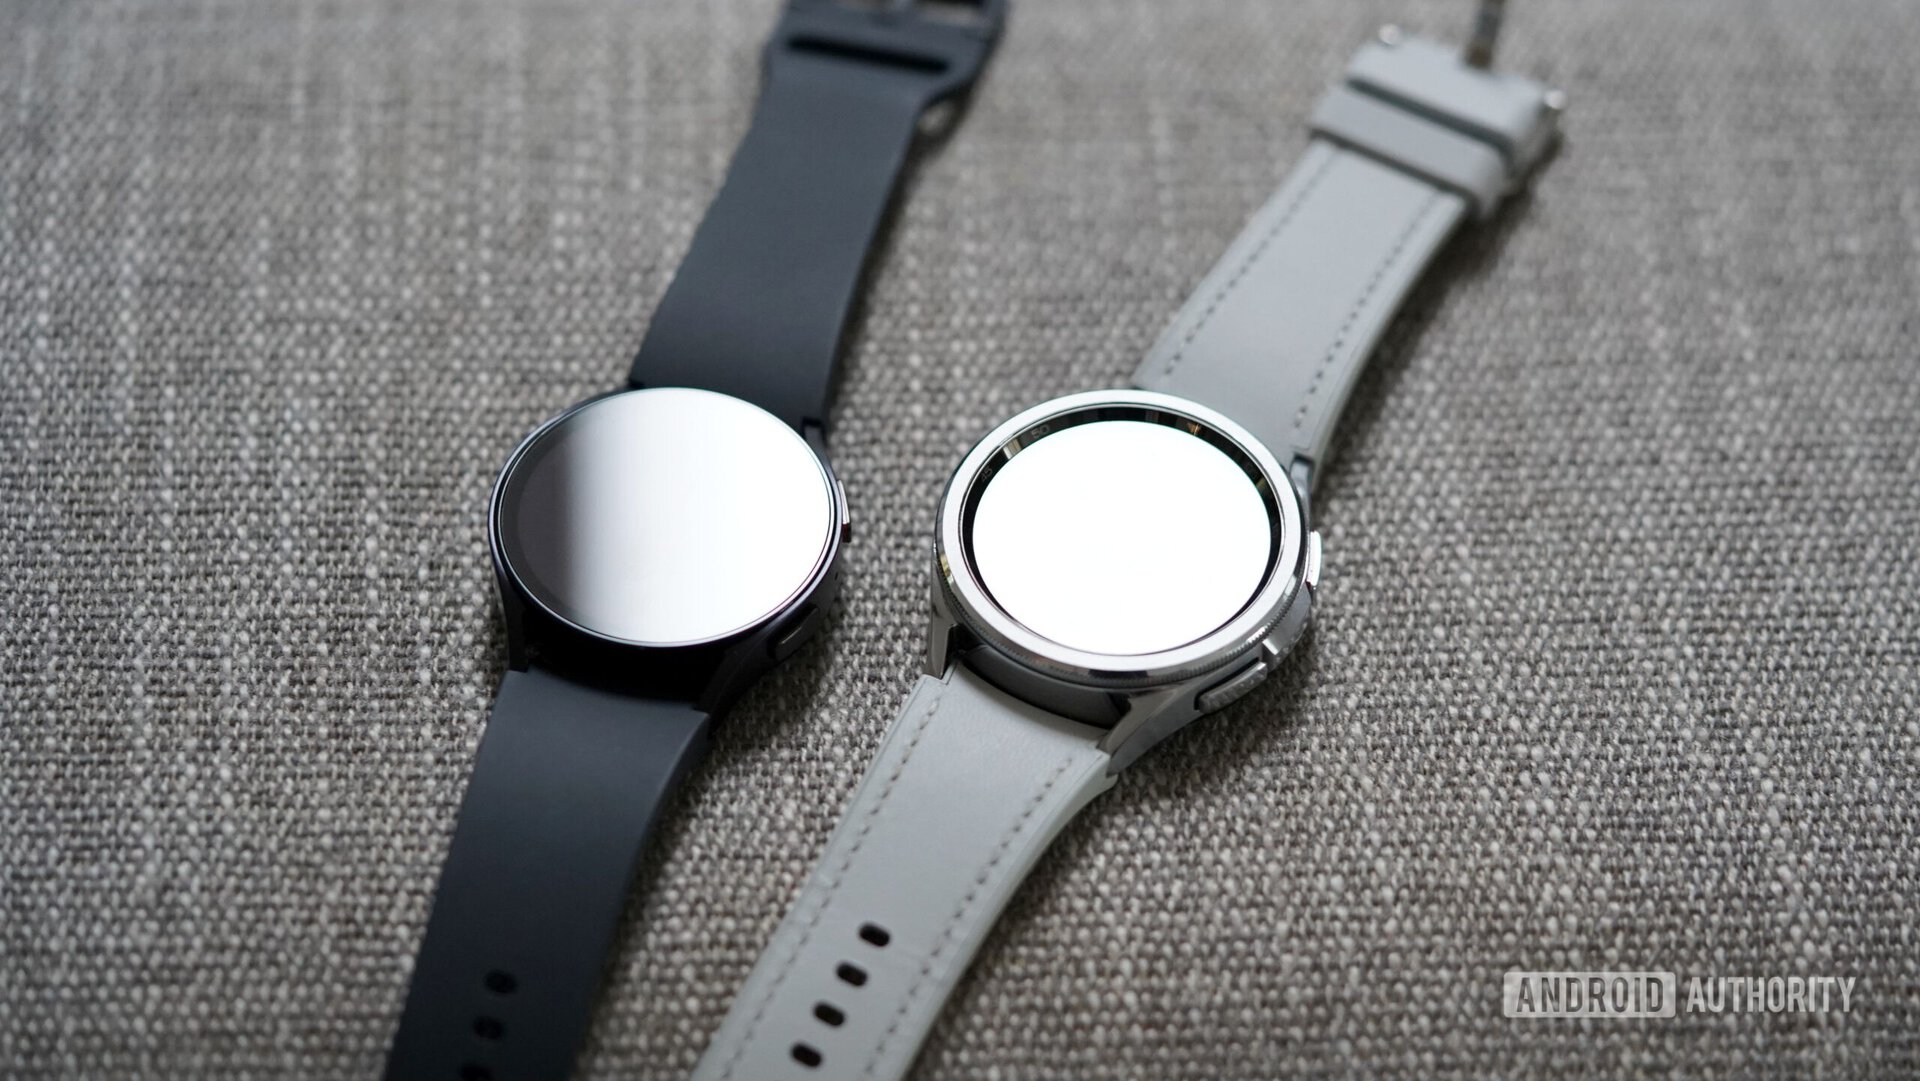 Samsung Galaxy Watch 6 series devices rest on a gray surface.